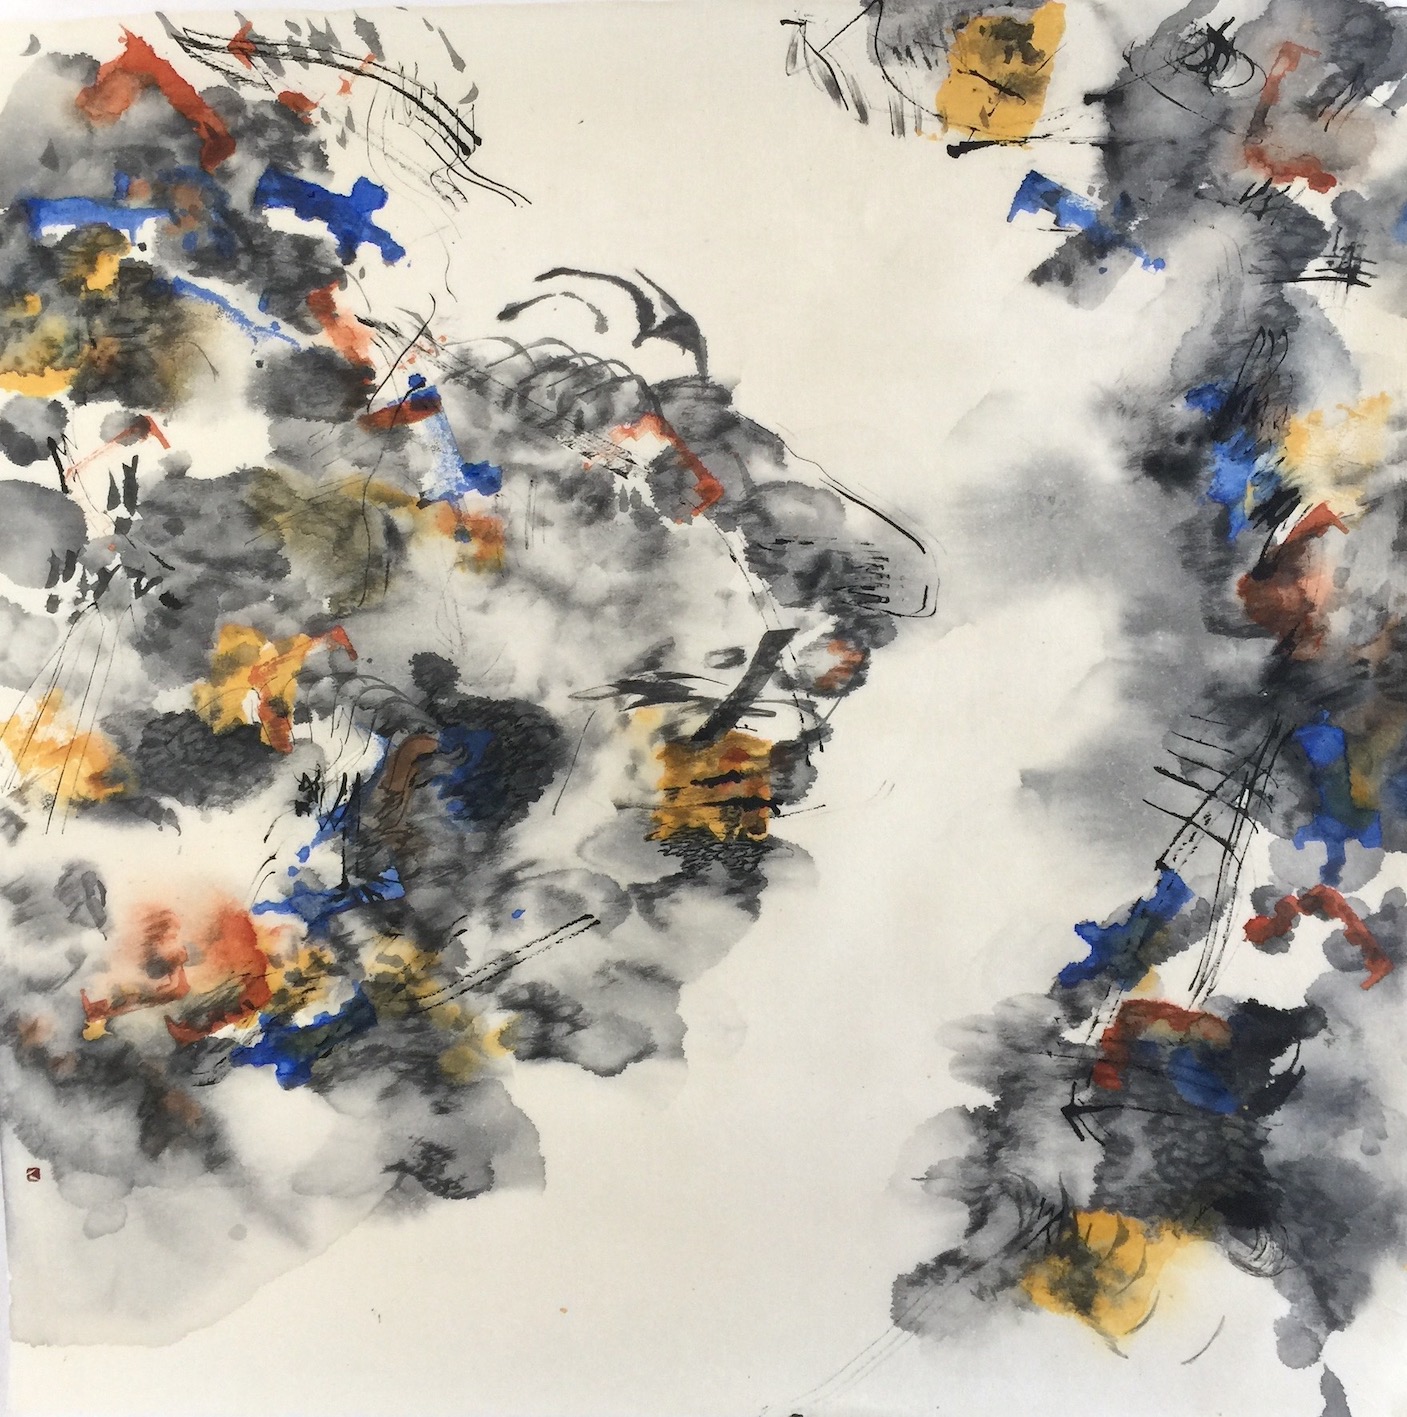 Breaks in the Clouds 4 49 X 48 cms, Sumi ink, acrylic 雲の裂け目 4 墨、アクリル　　2020